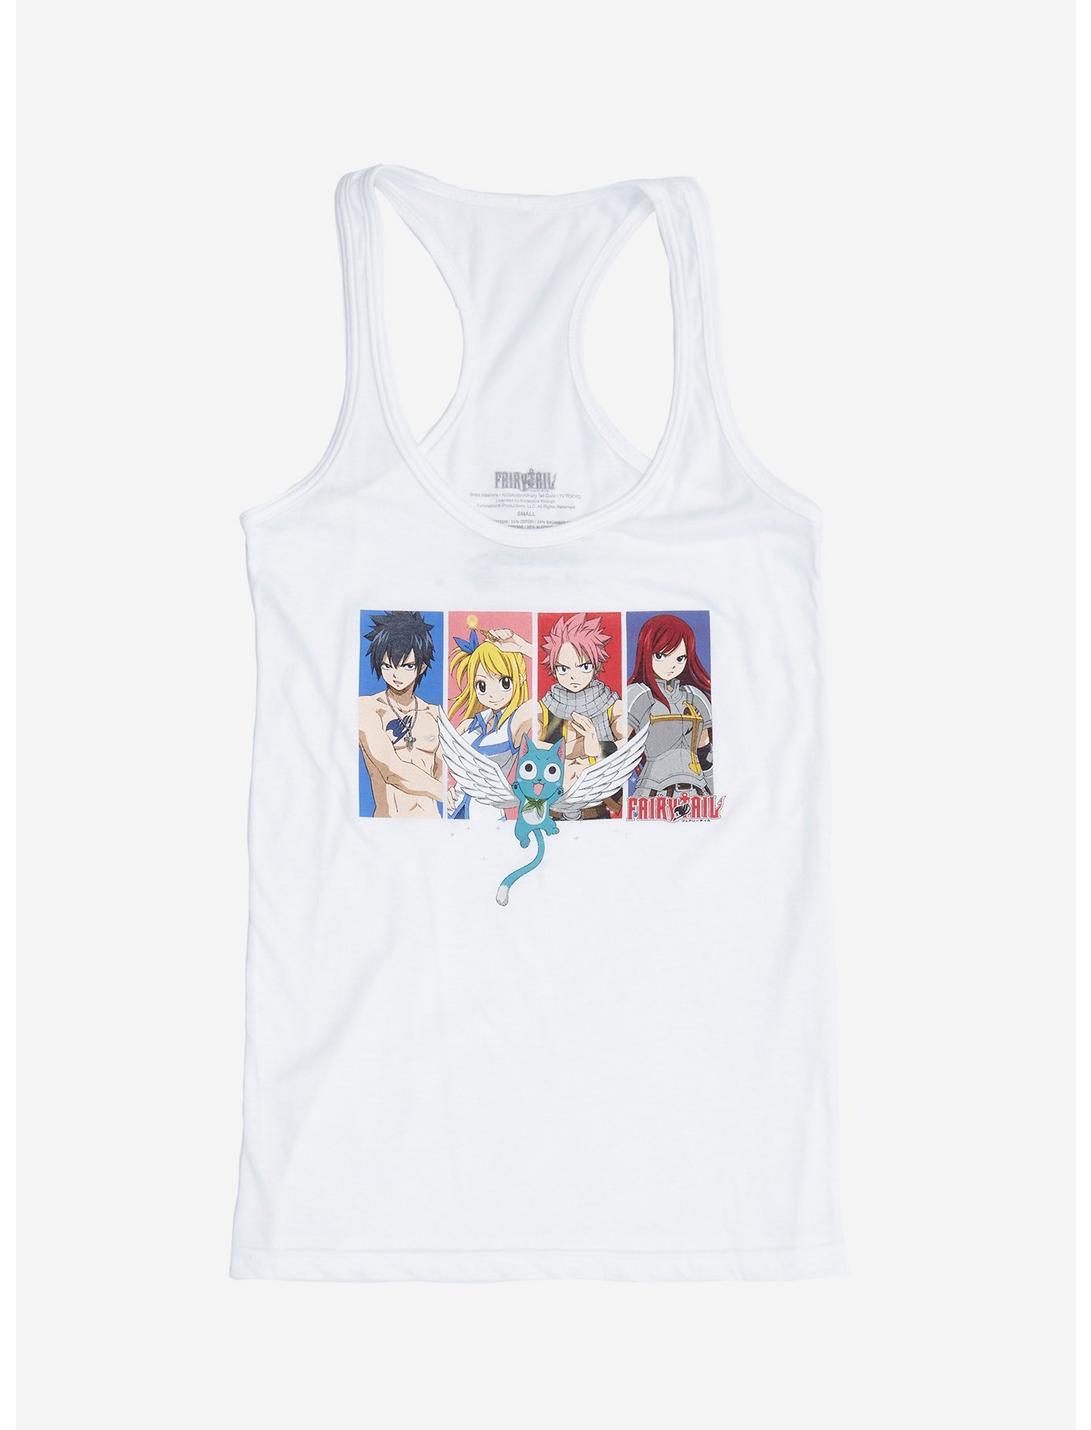 Fairy Tail Character Panel Girls Tank Top, MULTI, hi-res